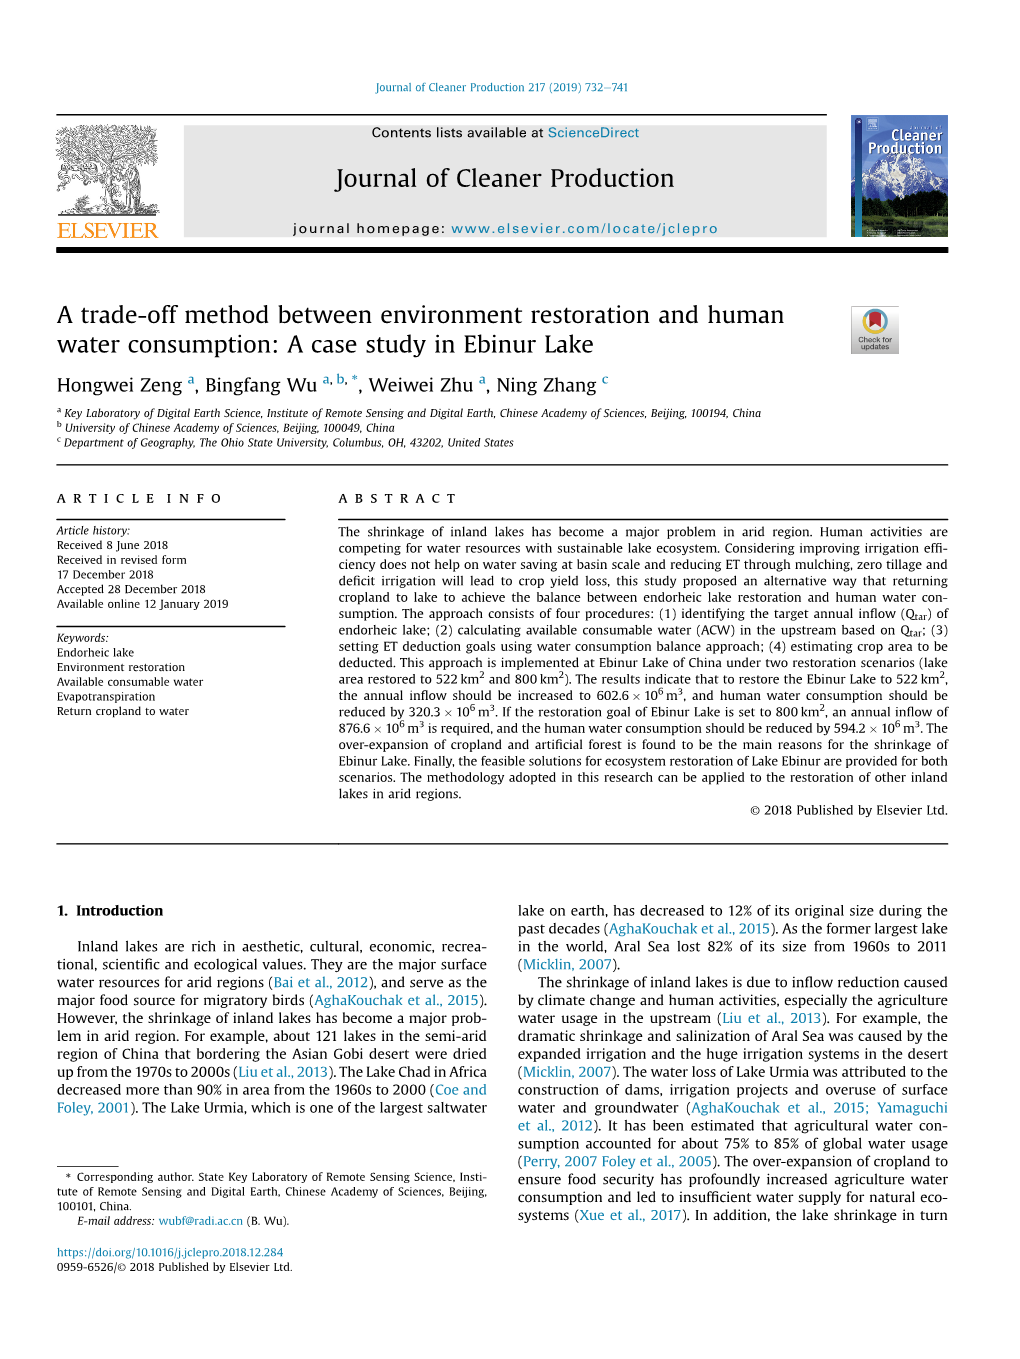 A Trade-Off Method Between Environment Restoration and Human Water Consumption: a Case Study in Ebinur Lake